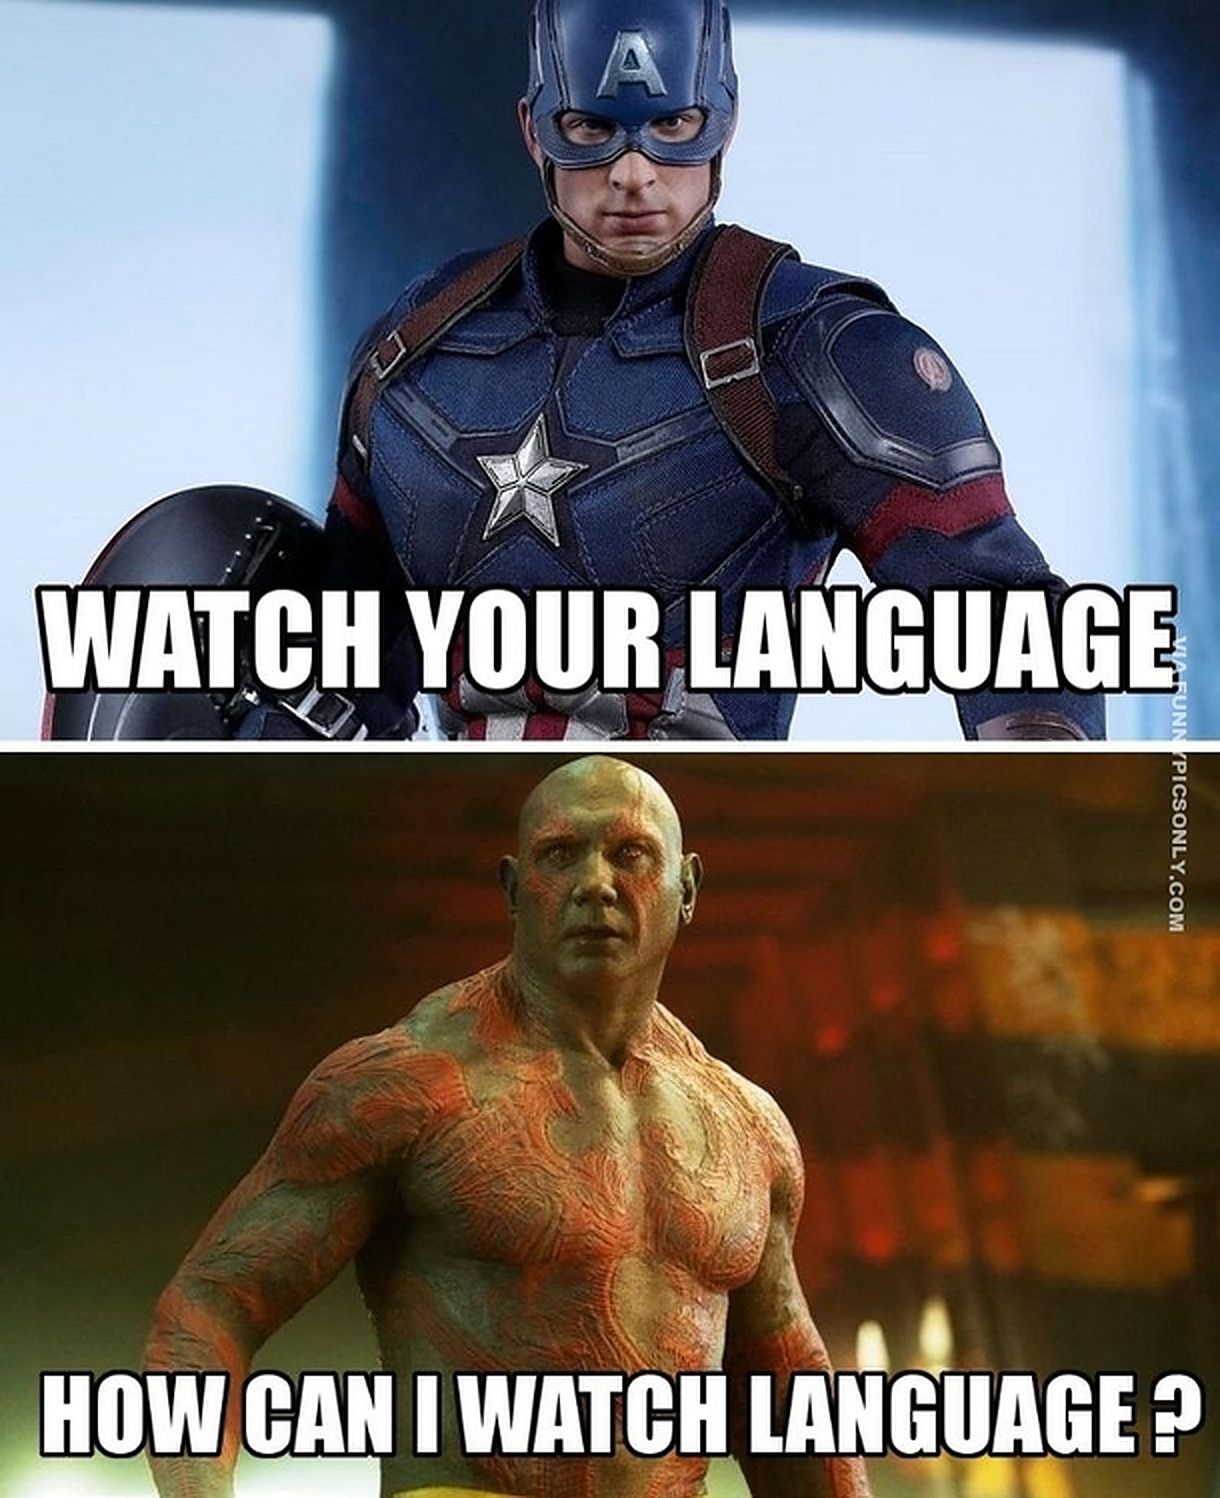 Captain America says to Drax to watch his language but Drax doesn't understand how he could watch language